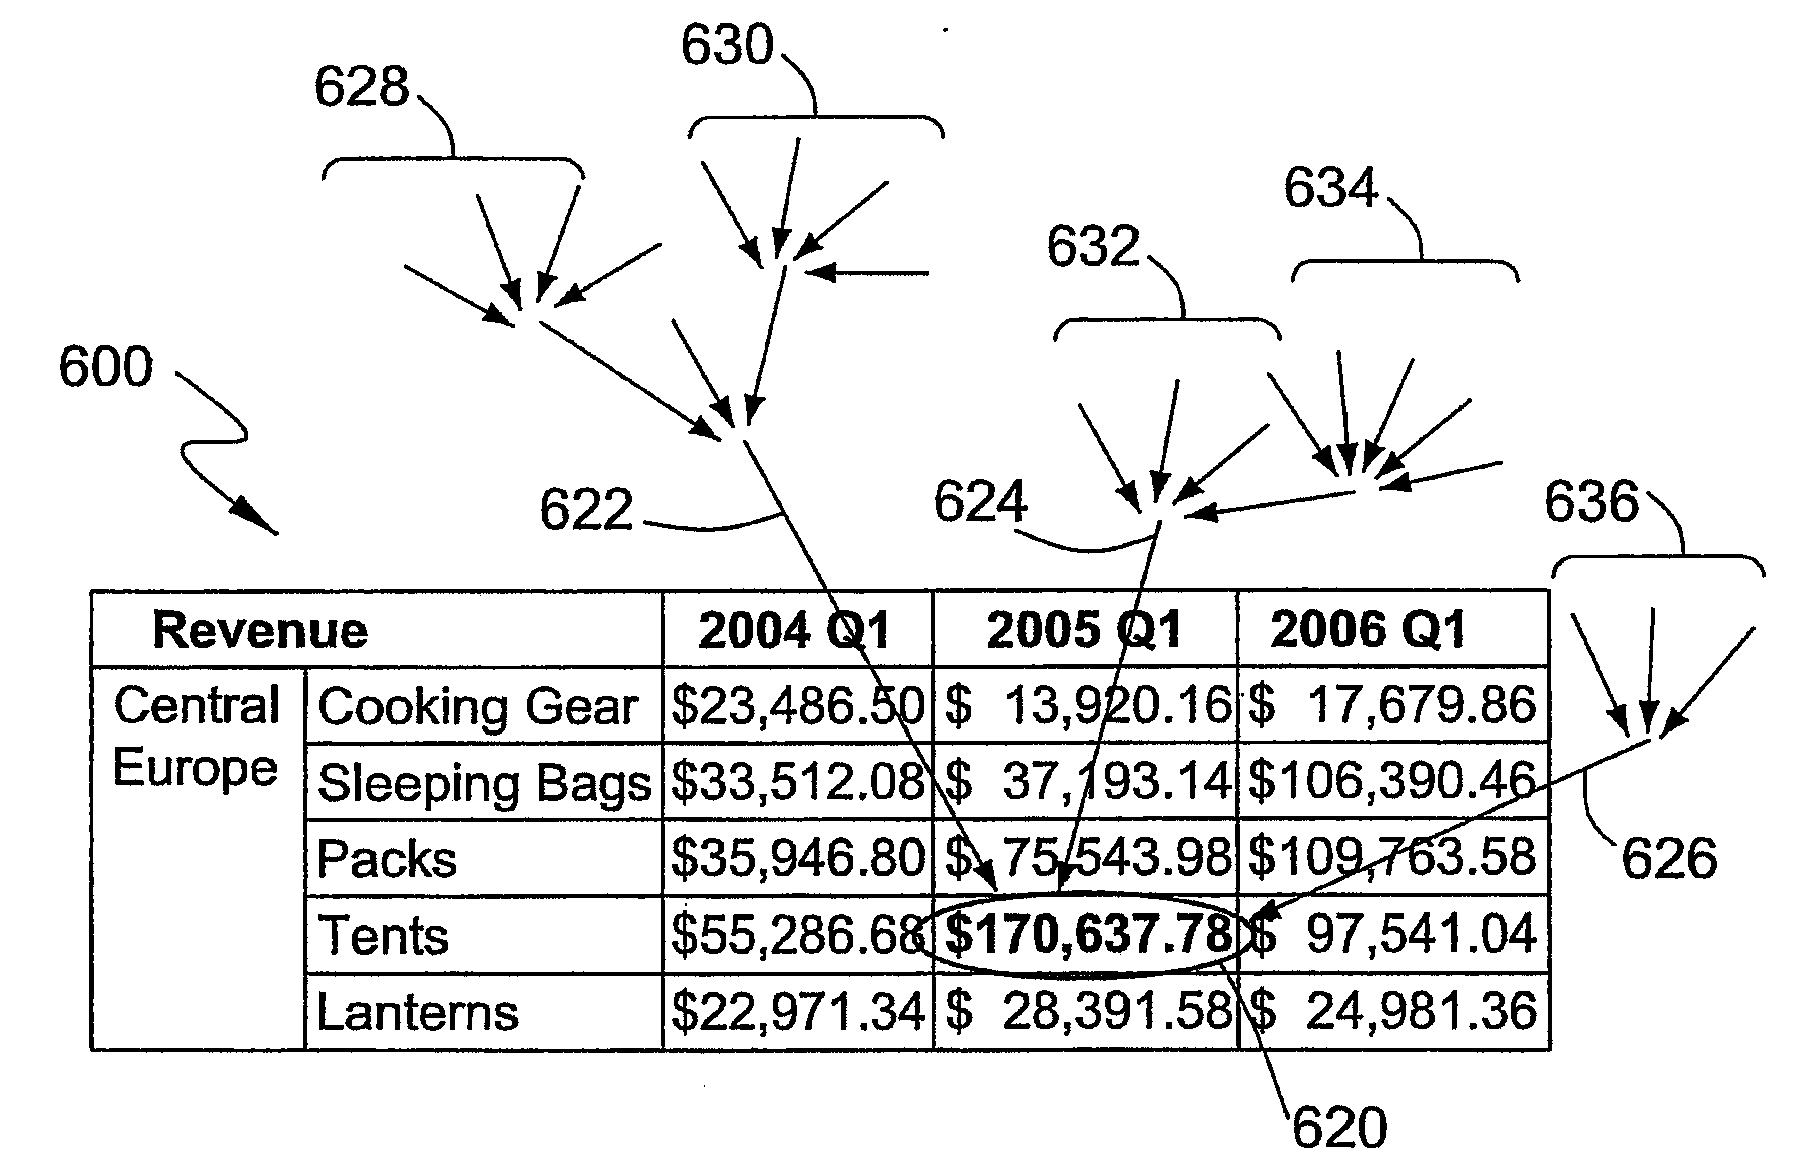 System and method for analyzing data in a report